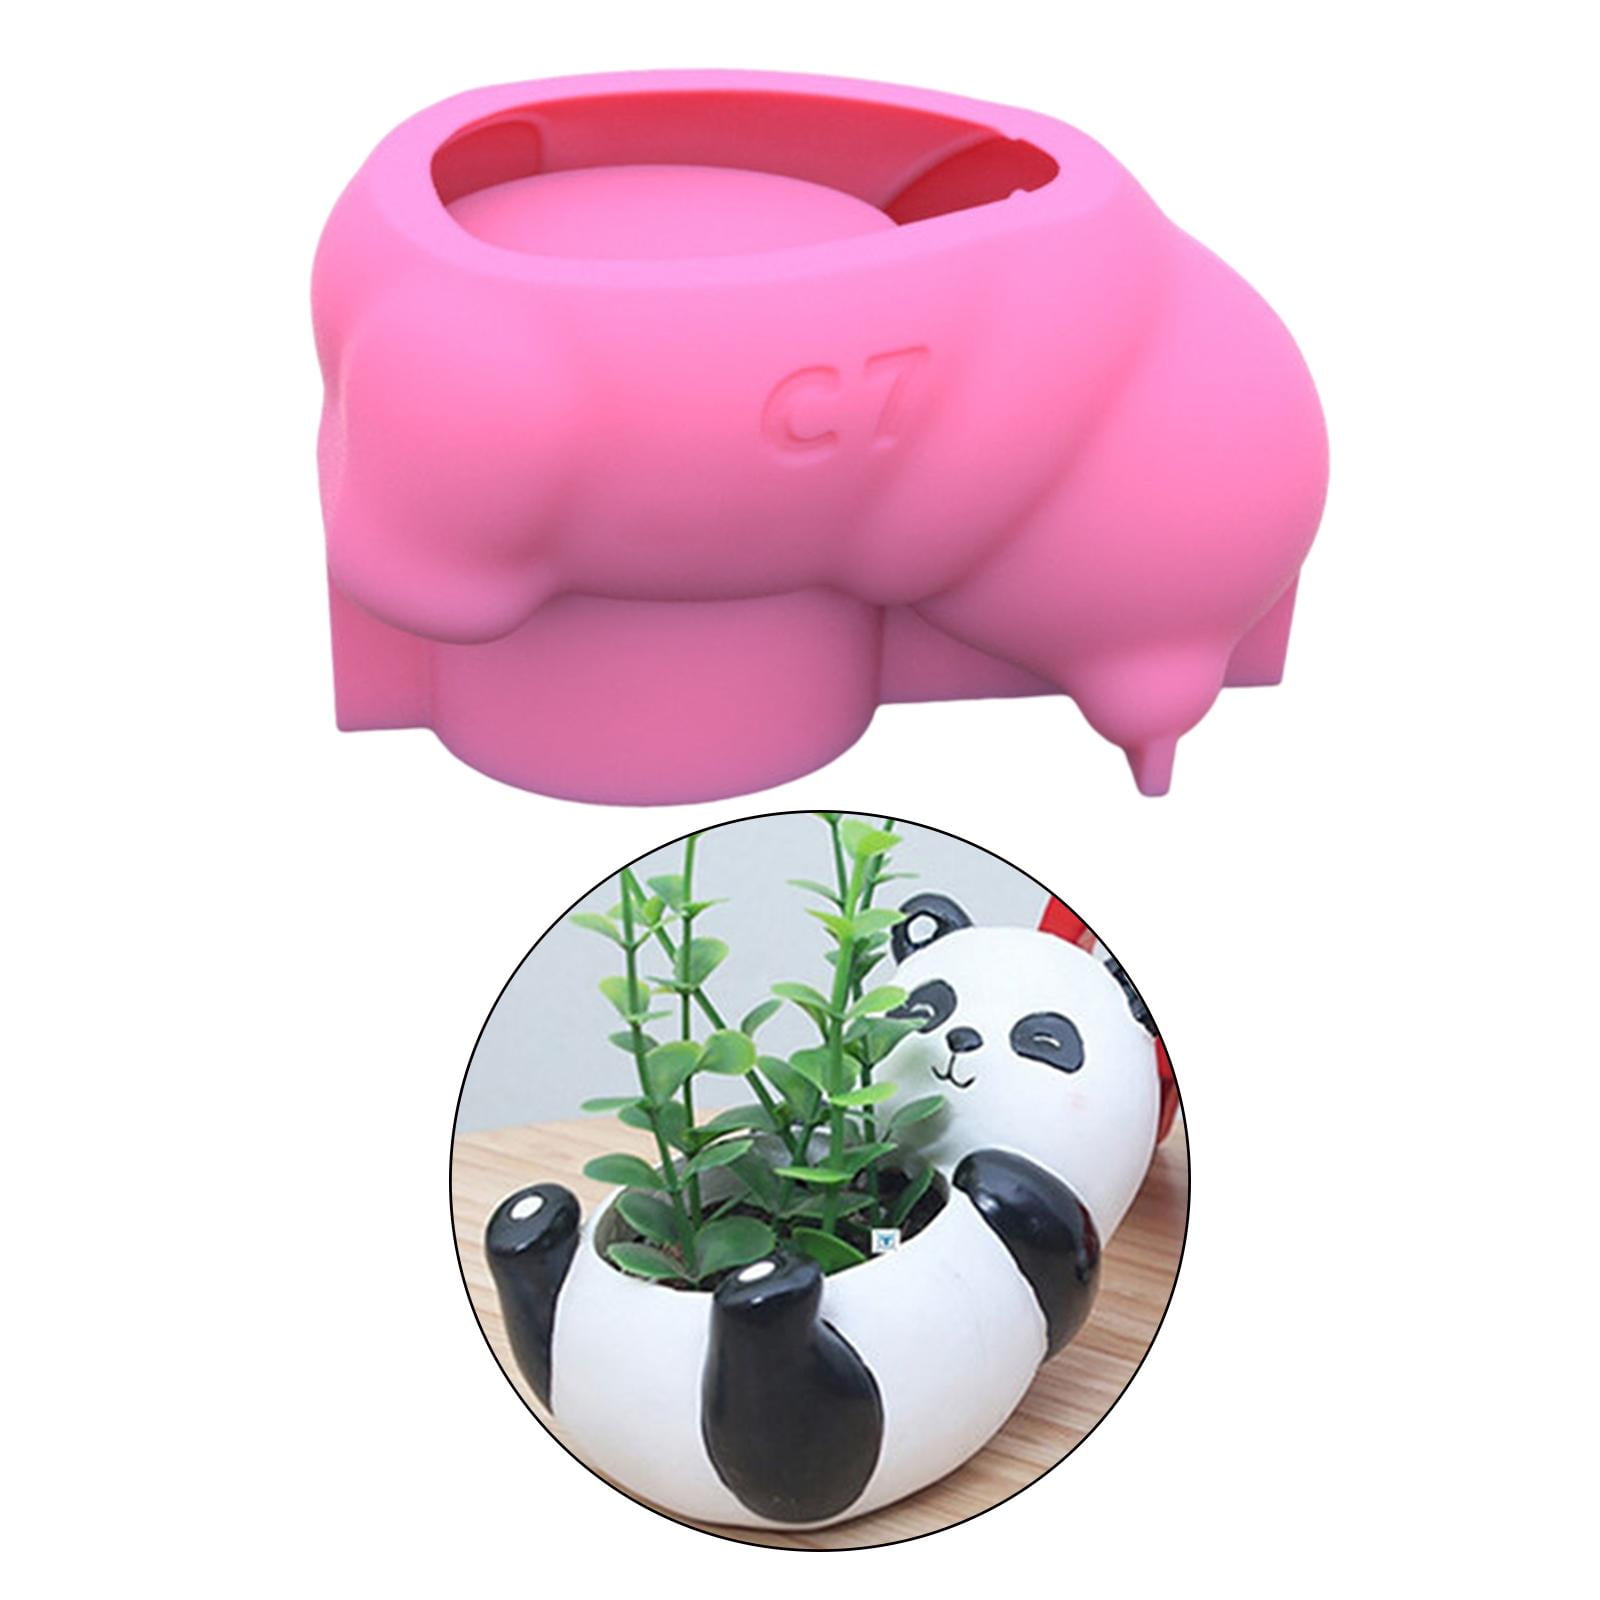 Silicone Pot Cartoon Animal Flower Pot Making for Jewelry Making Tools  Panda Shaped Candle Holder Flowerpot Planter 